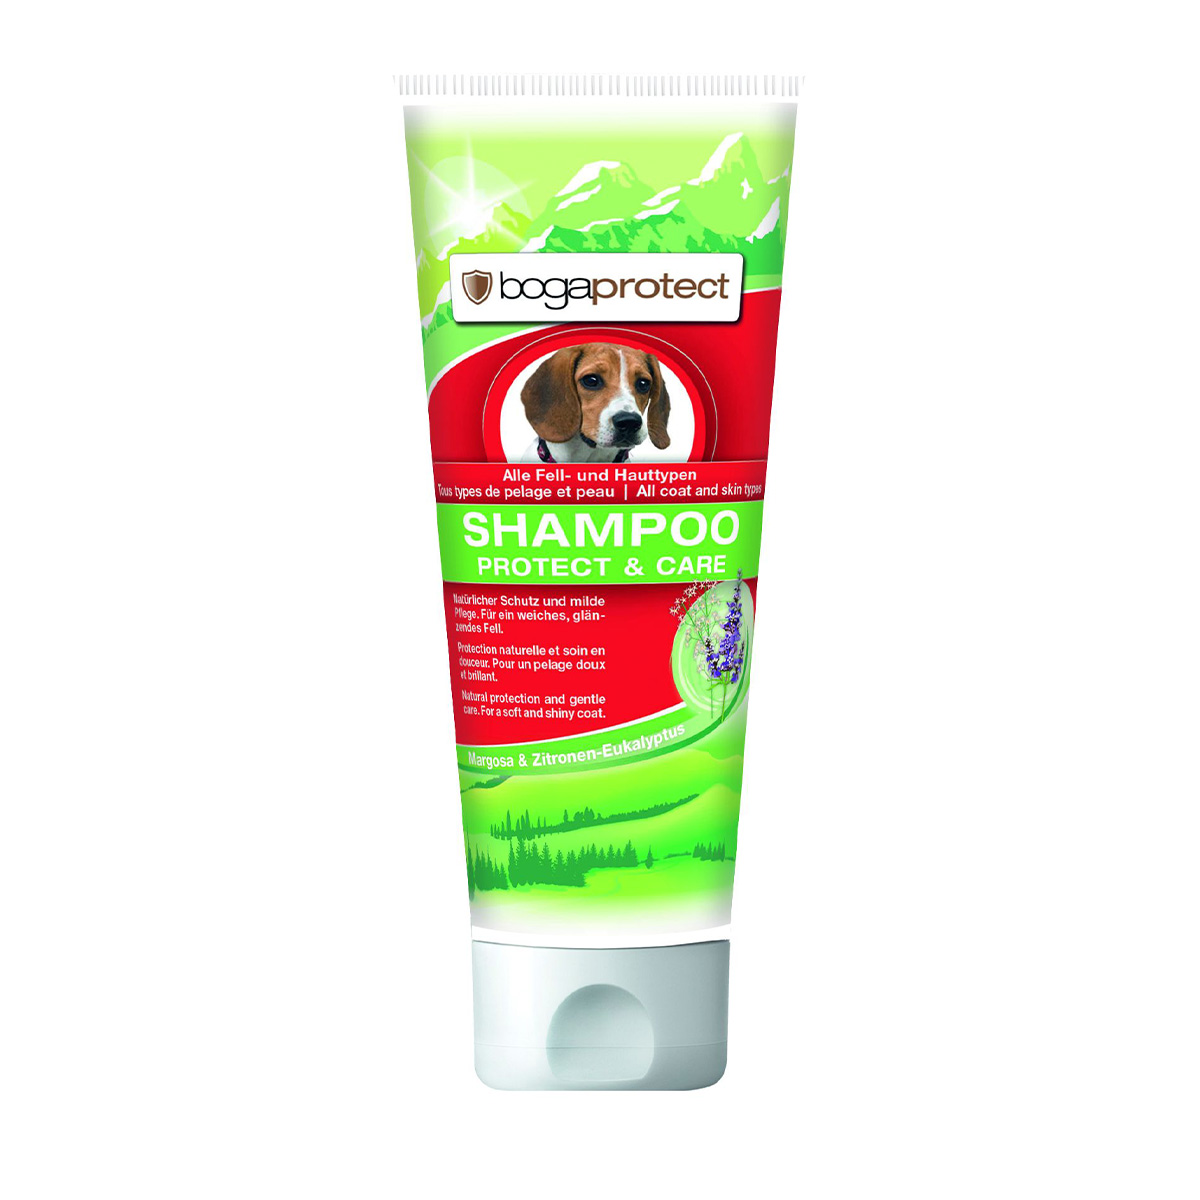 bogaprotect šampon protect & care 200 ml